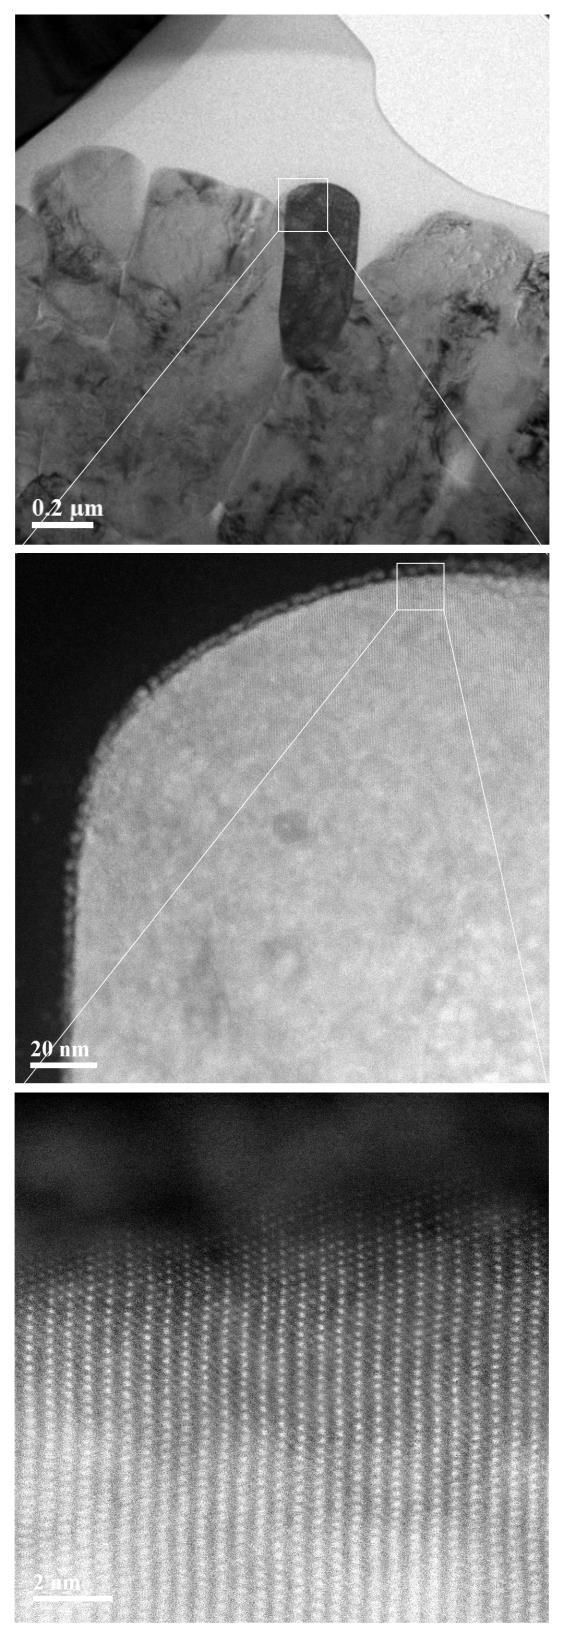 Supplementary Figure 27: HAADF-STEM images of pristine 8 10 µm LiNi 0.7 Co 0.15 Mn 0.15 O 2 material.